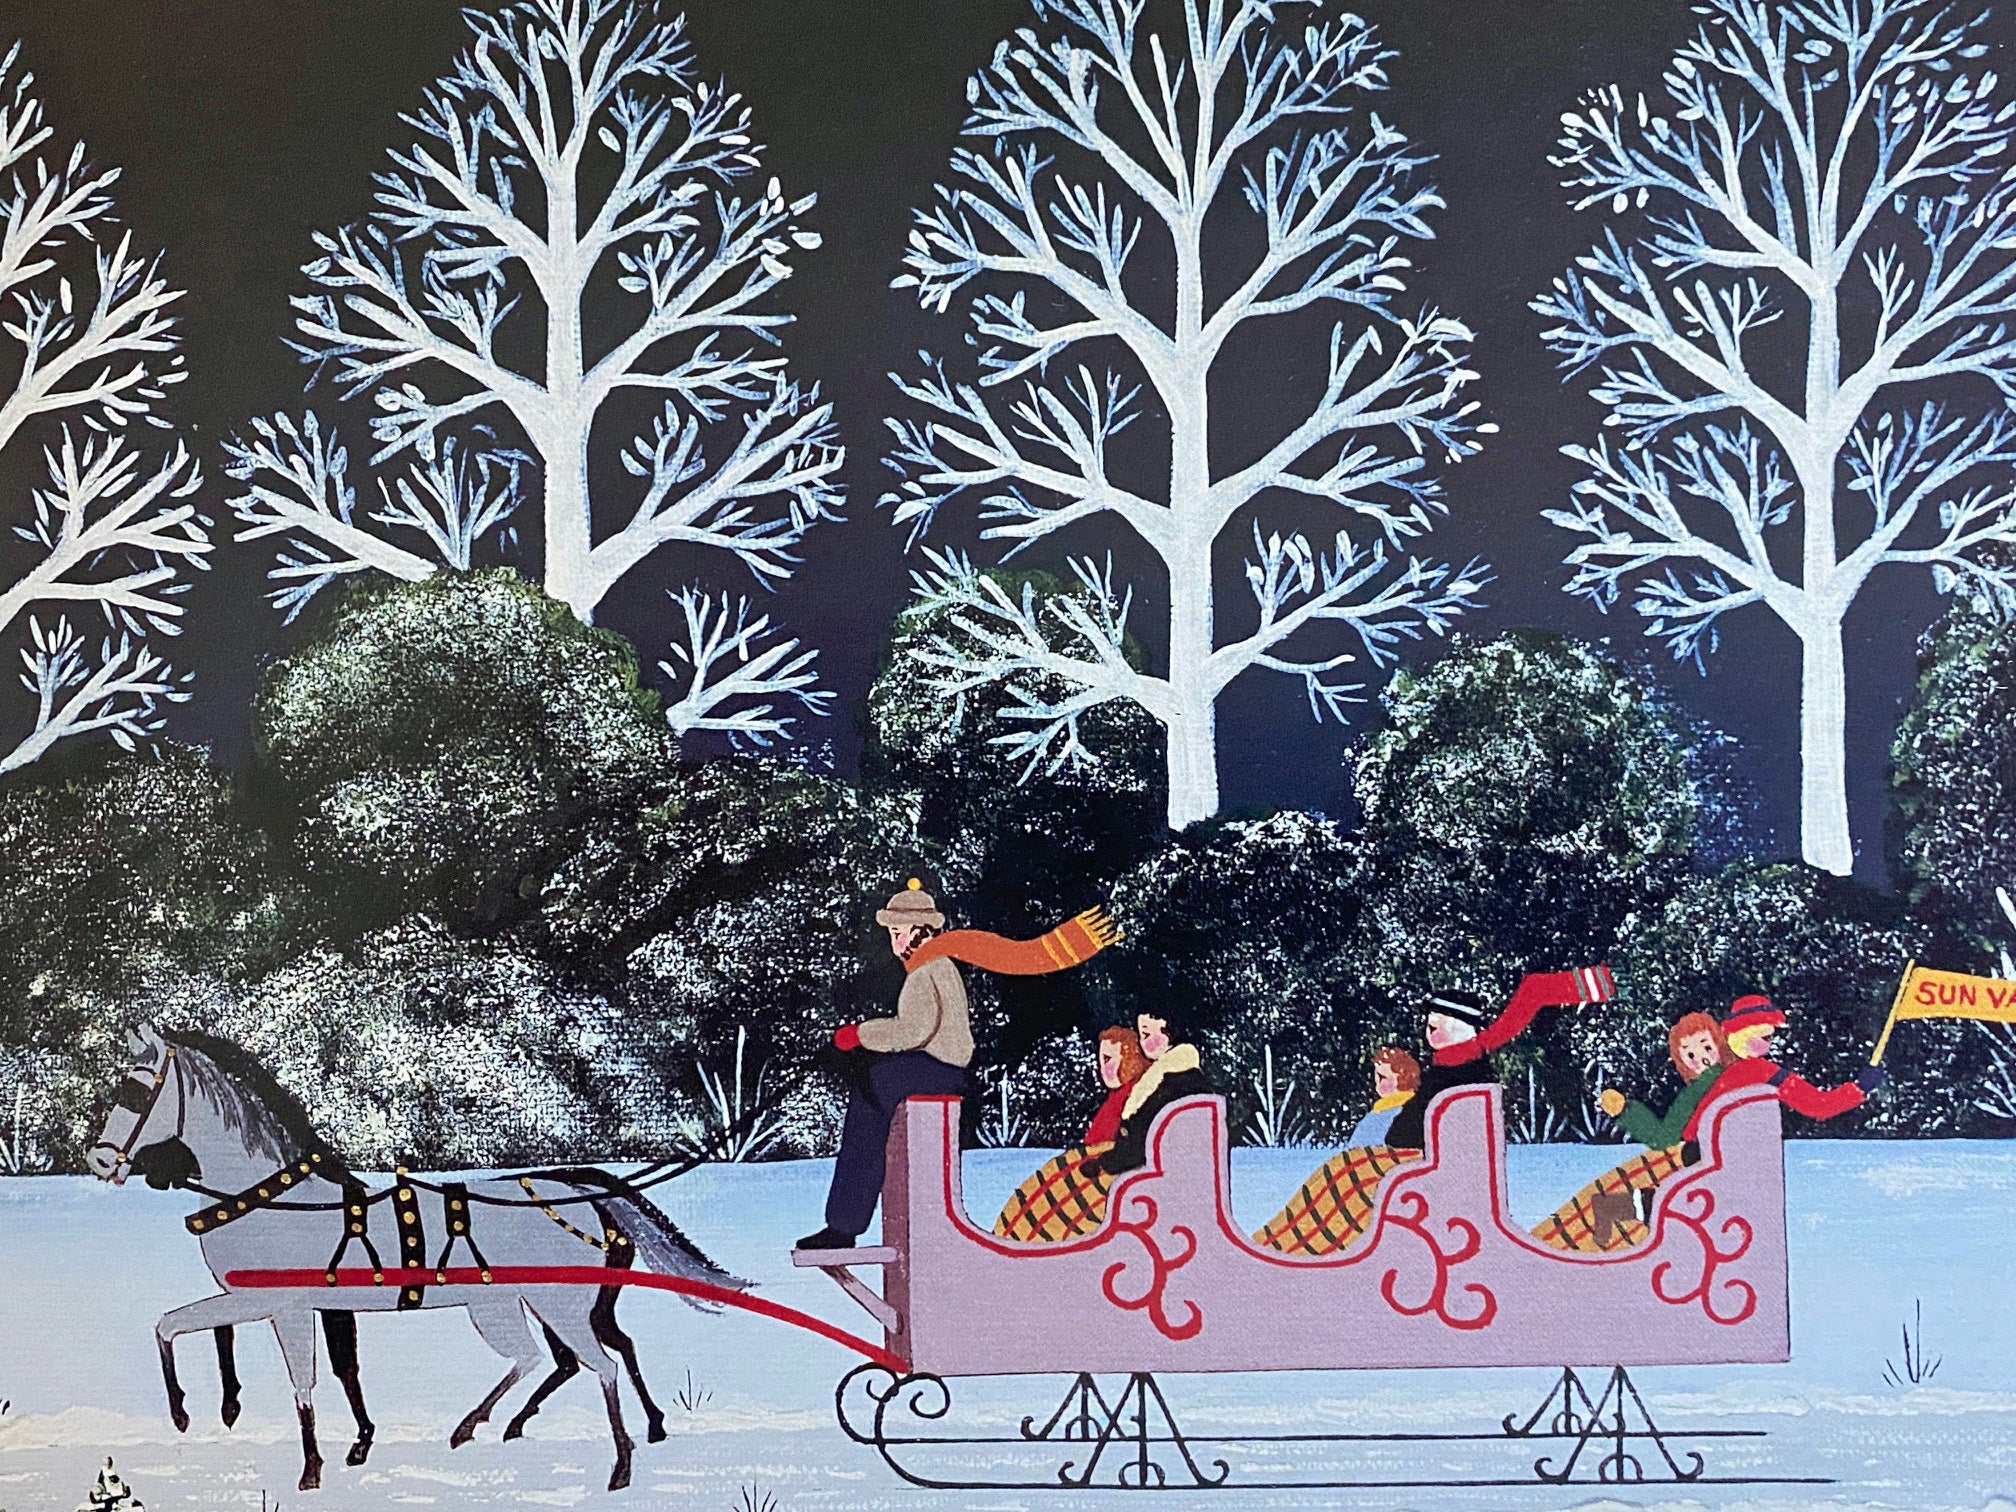 Trail Creek Sleigh Ride - Limited Edition Artist Proof Lithograph on Paper by Jane Wooster Scott